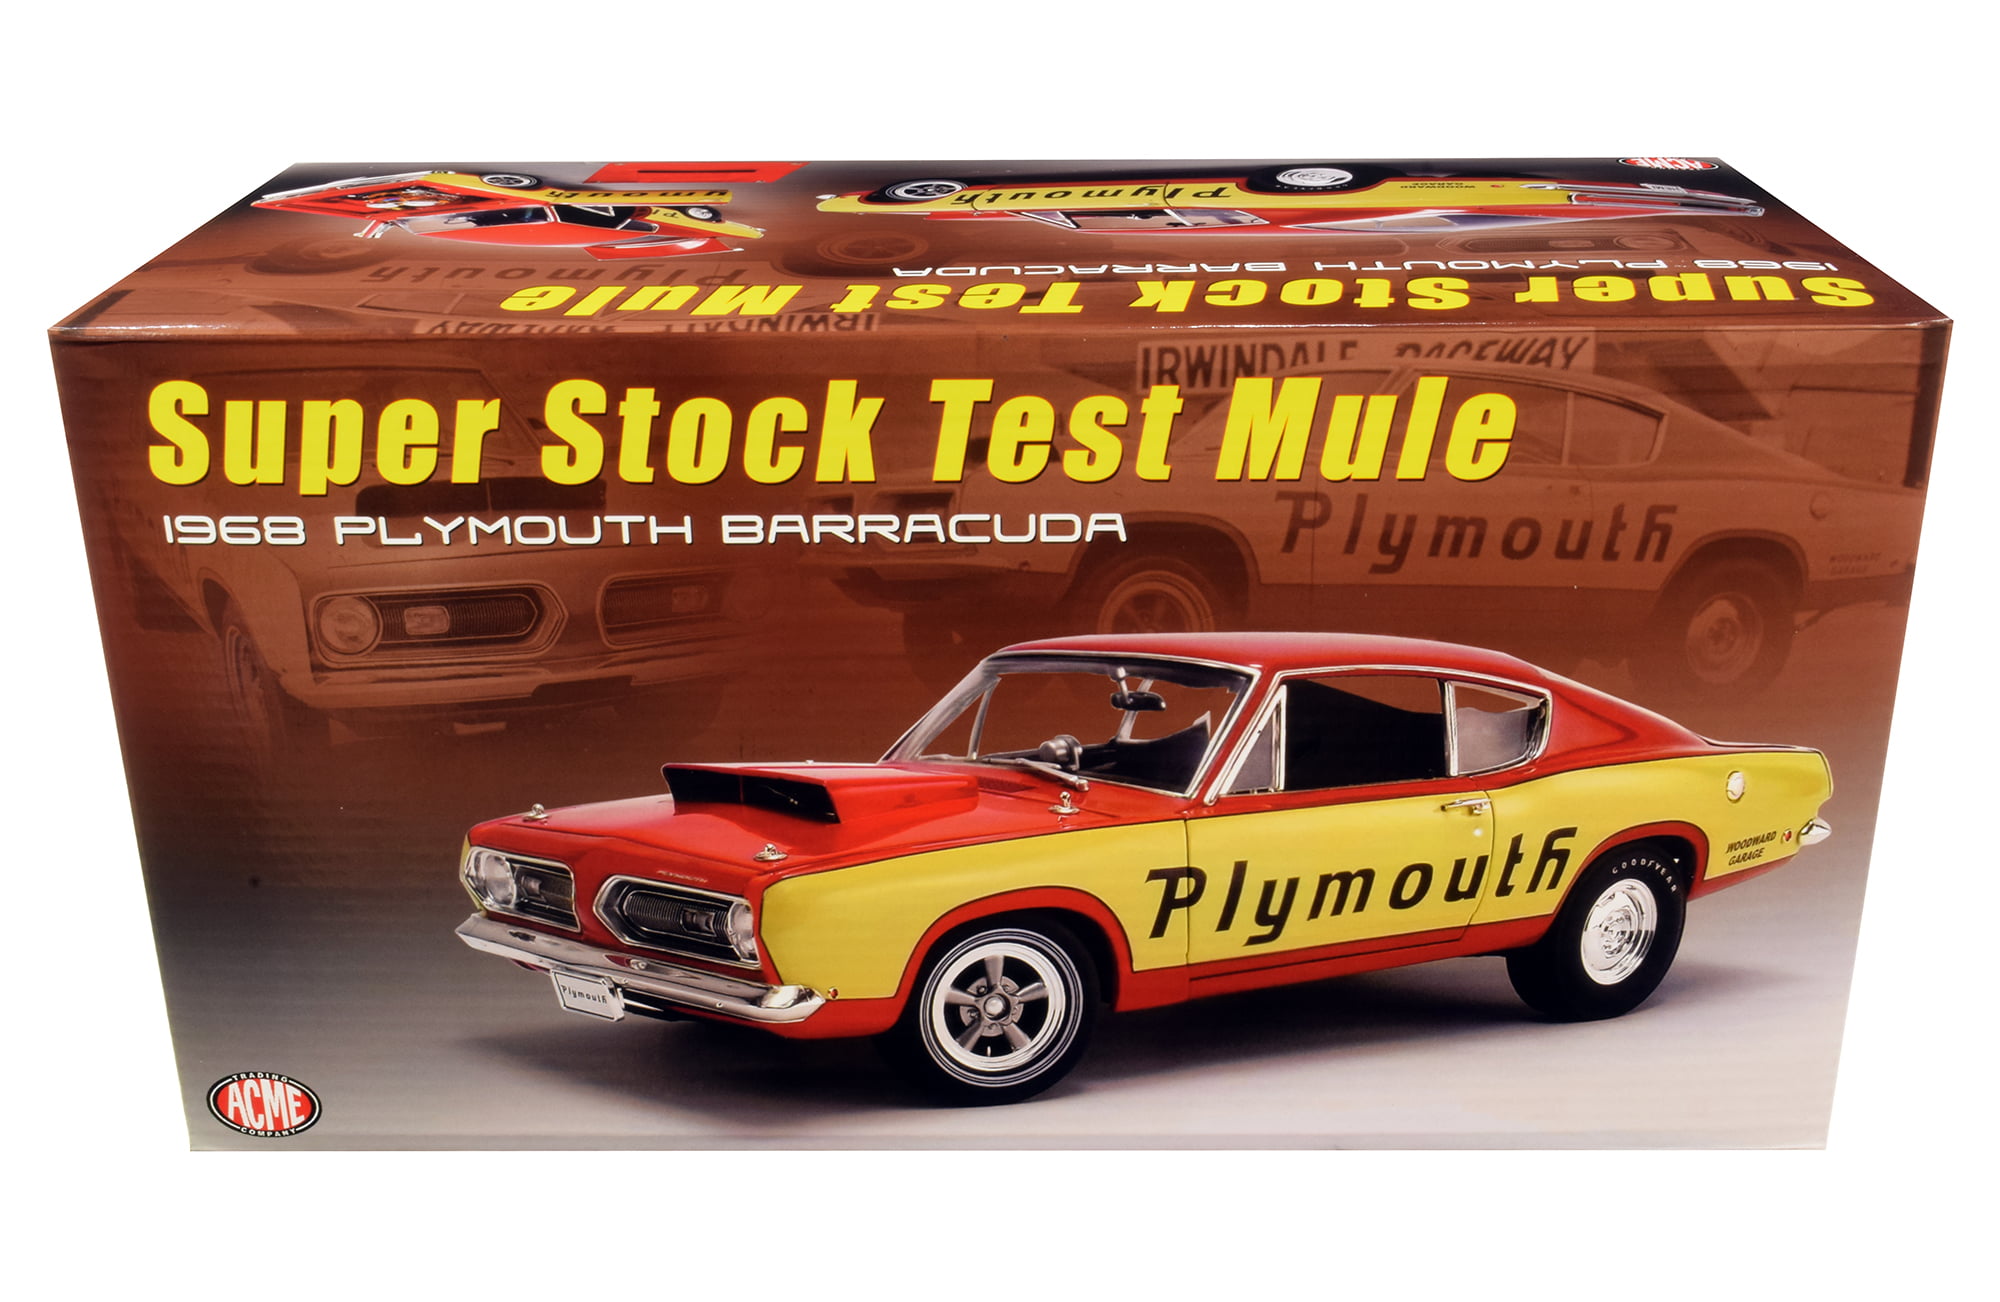 1968 Plymouth Barracuda Super Stock Test Mule Red & Yellow Limited Edition  to 462 pieces 1/18 Diecast Model Car by ACME